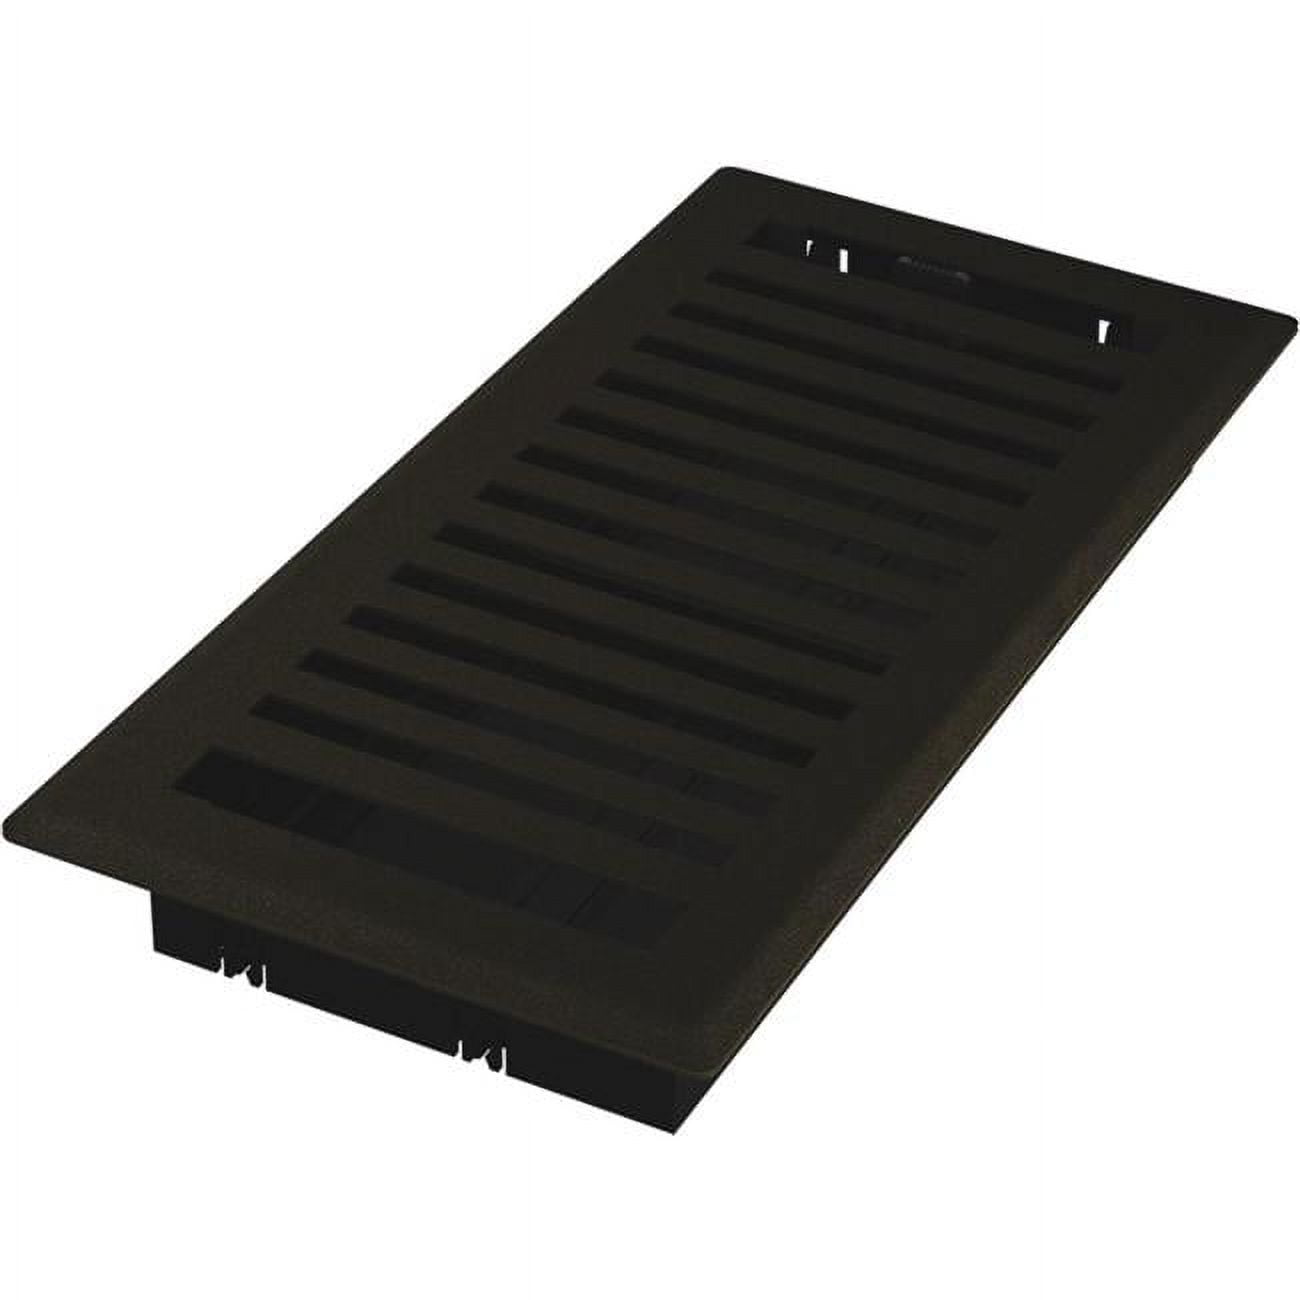 Thermwell  Magnetic Register and Vent Cover, 8 x 15 - 3 pack